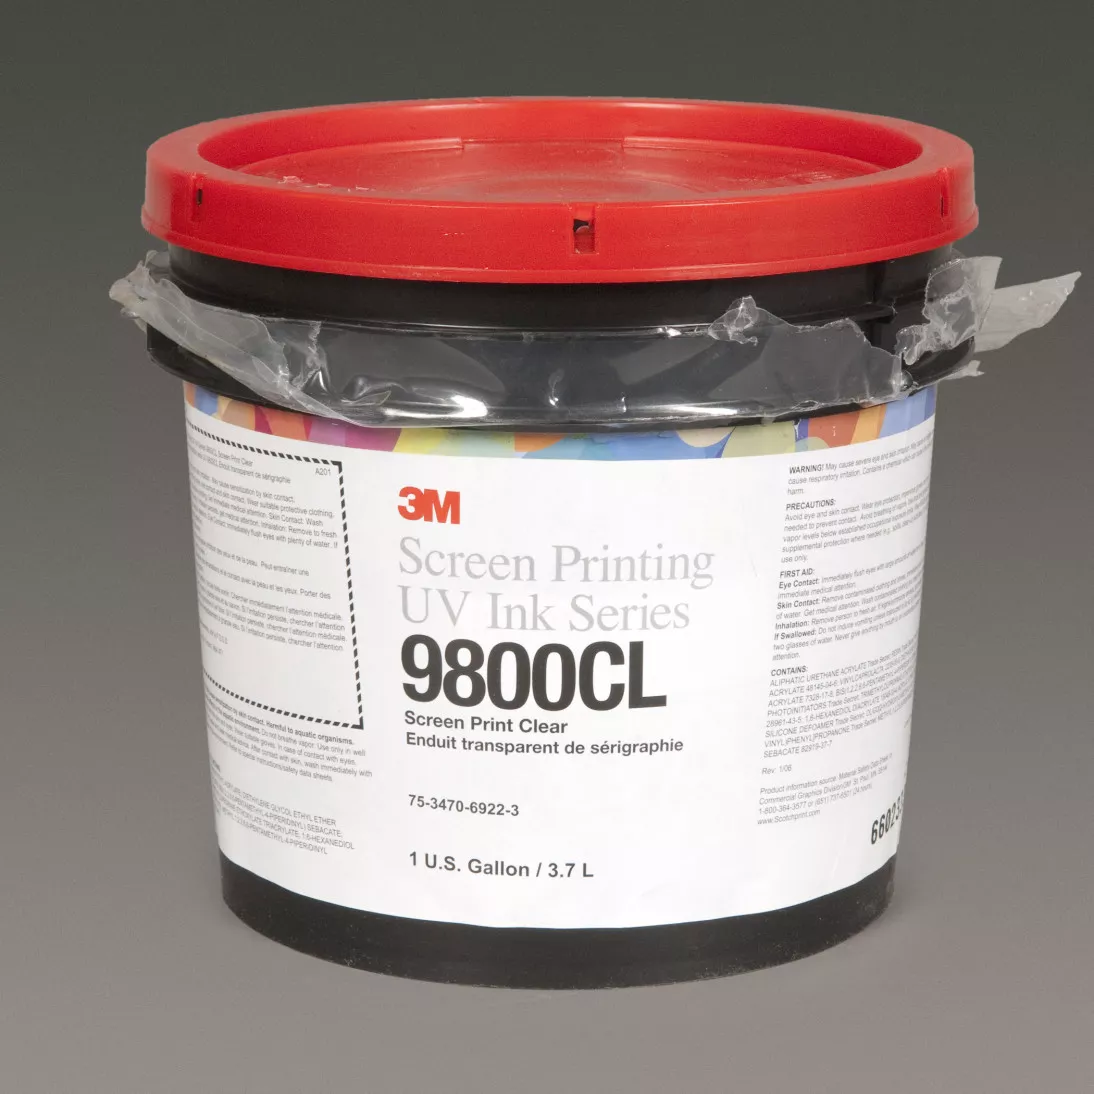 3M™ Screen Printing UV Ink 9800CL, Gloss, 1 Gallon Container